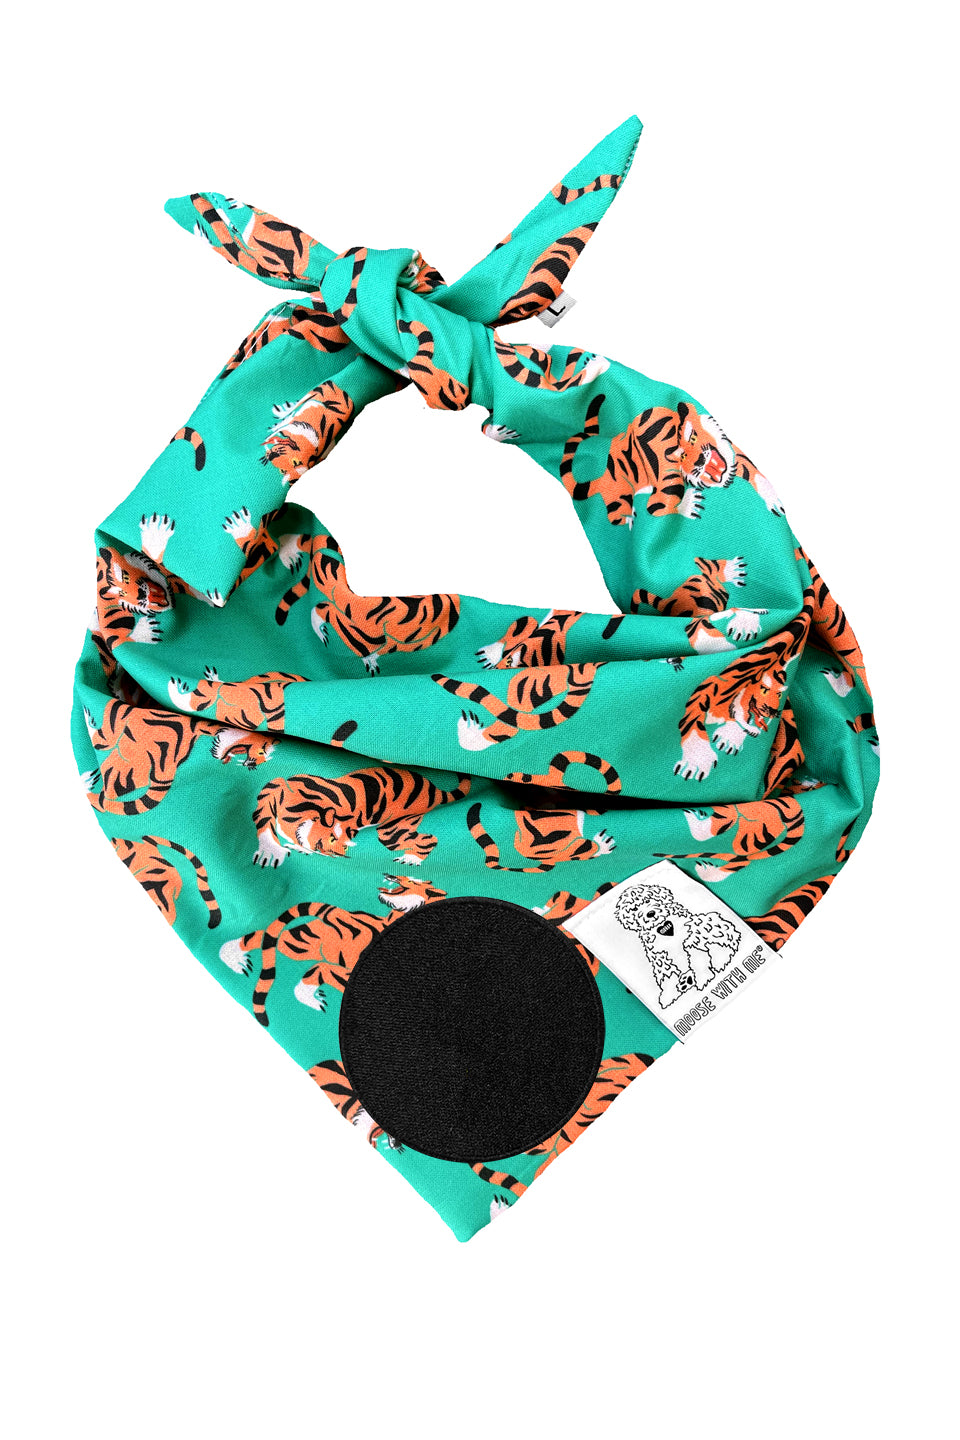 Dog Bandana Tigers - Customize with Interchangeable Velcro Patches